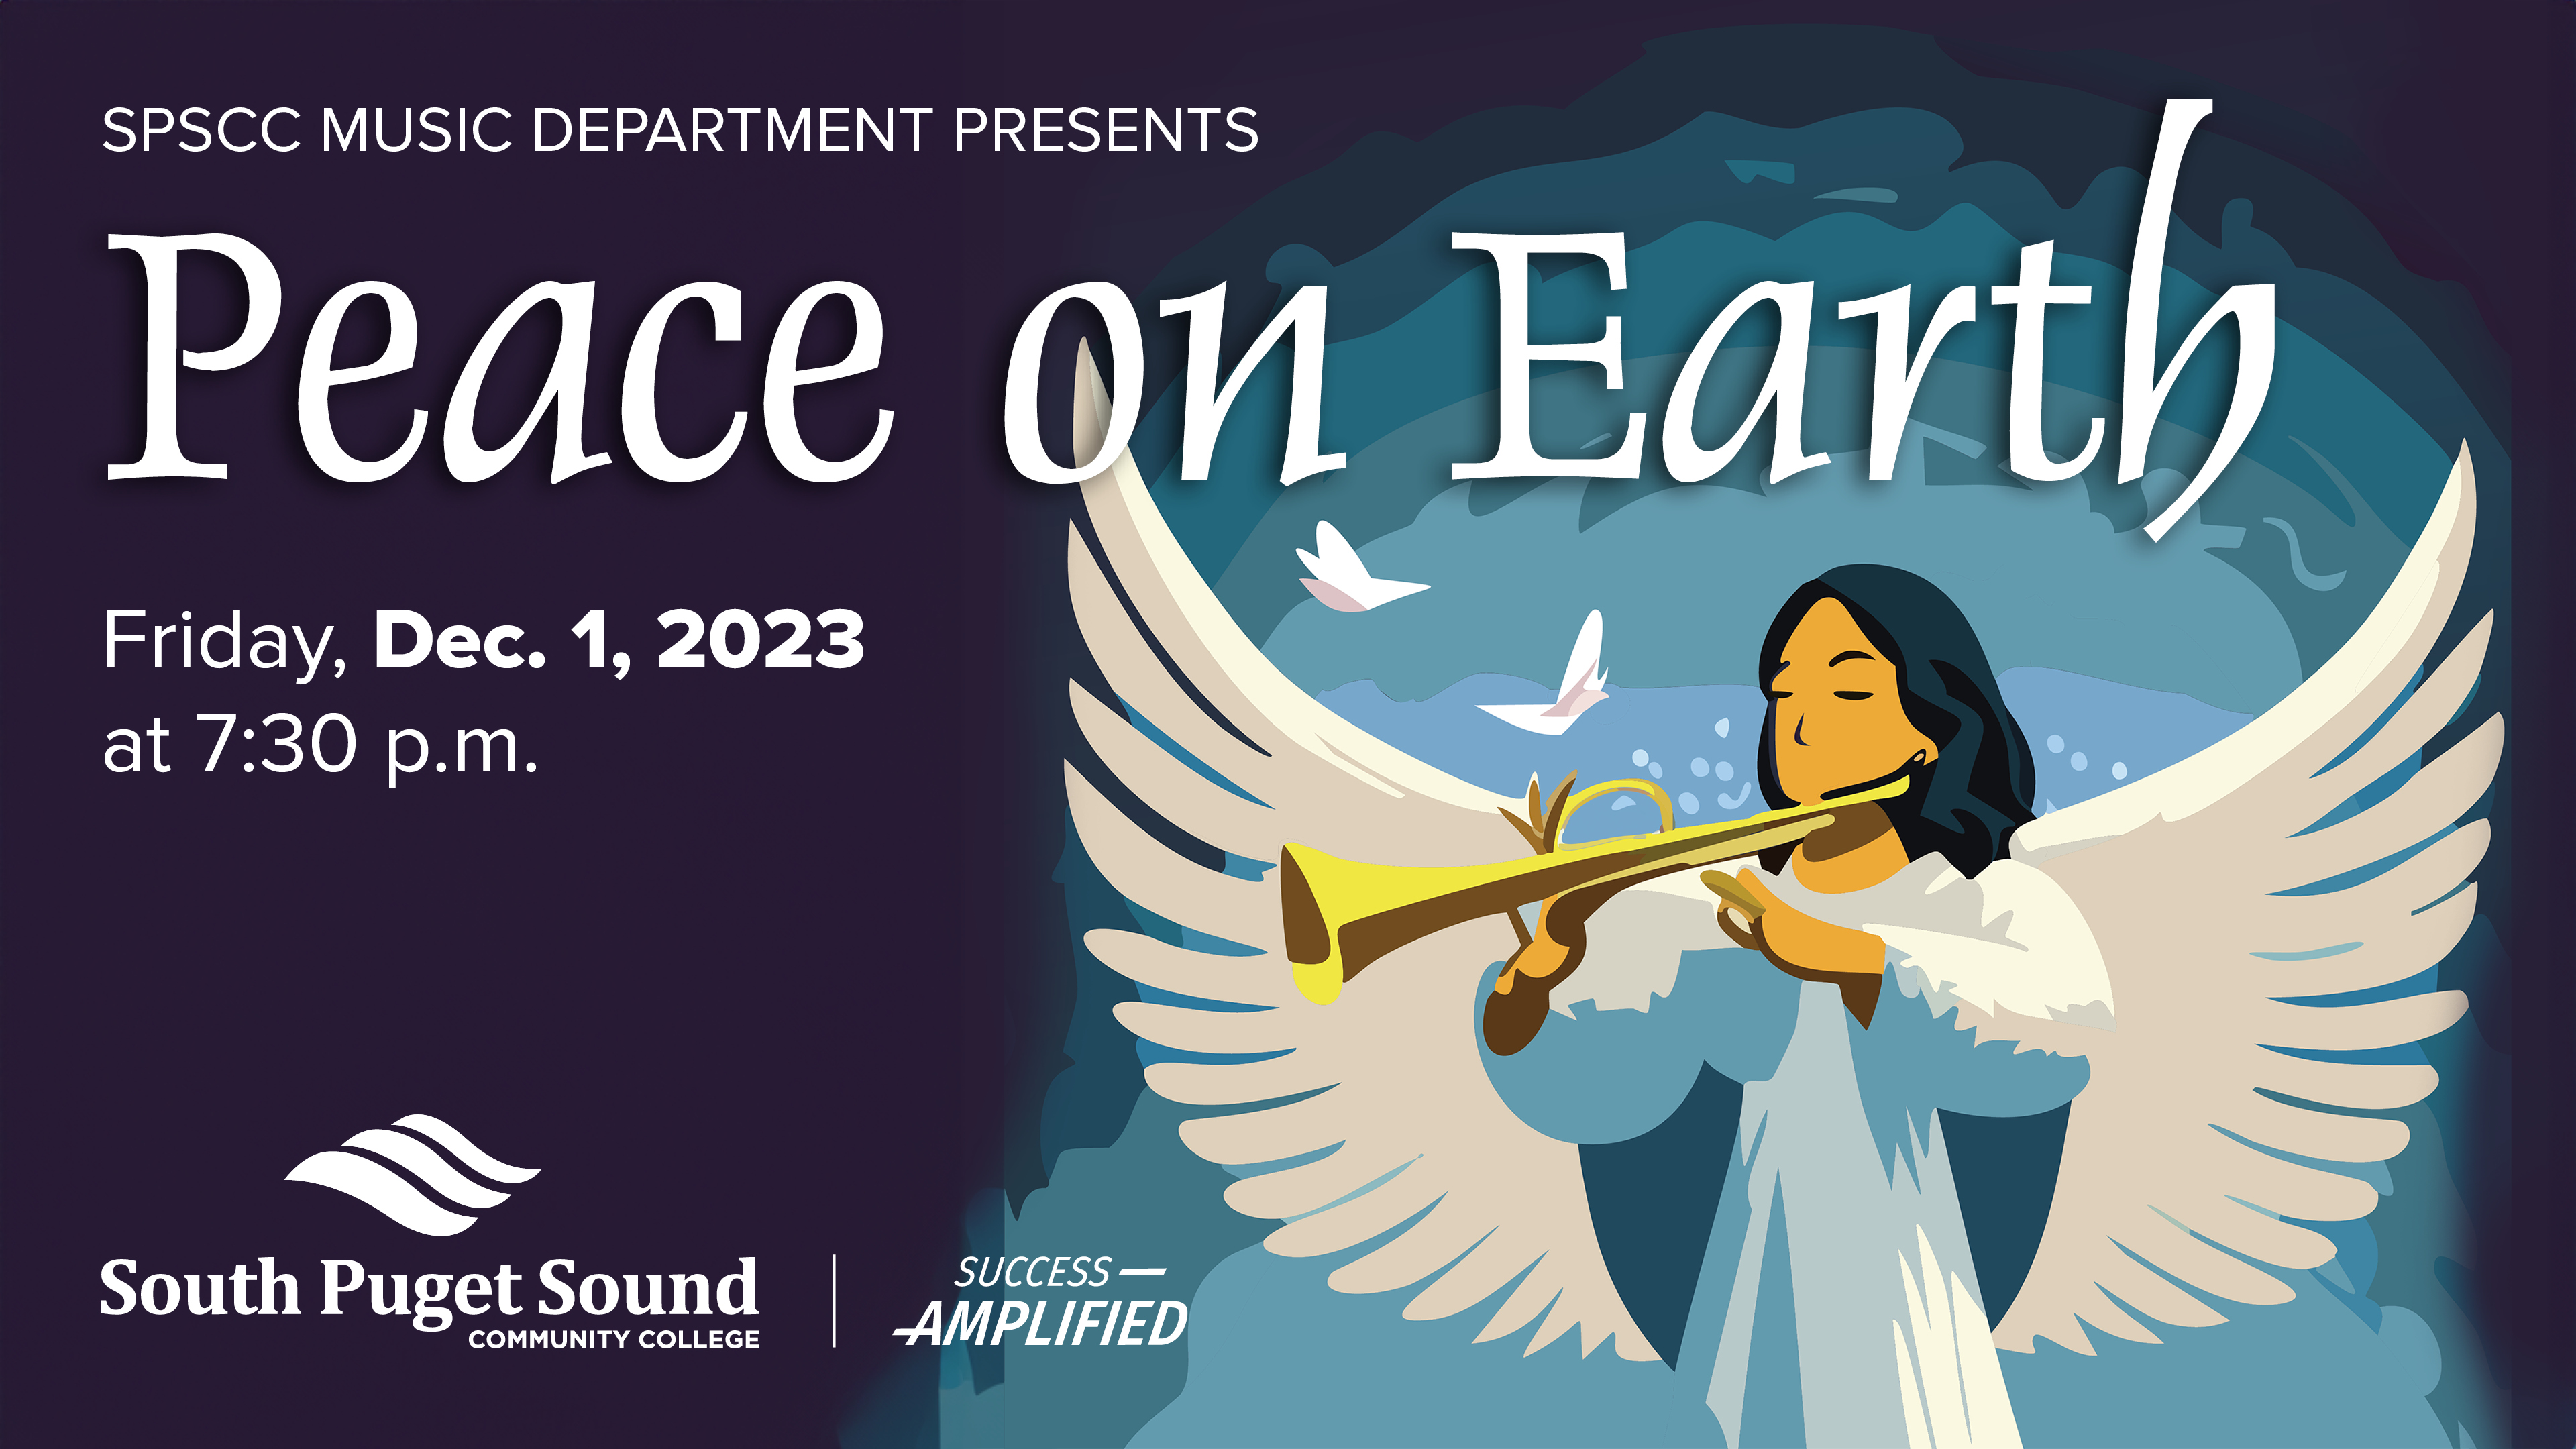 SPSCC Music Department presents Peace on Earth on Friday, Dec. 1, 2023 at 7:30 p.m.